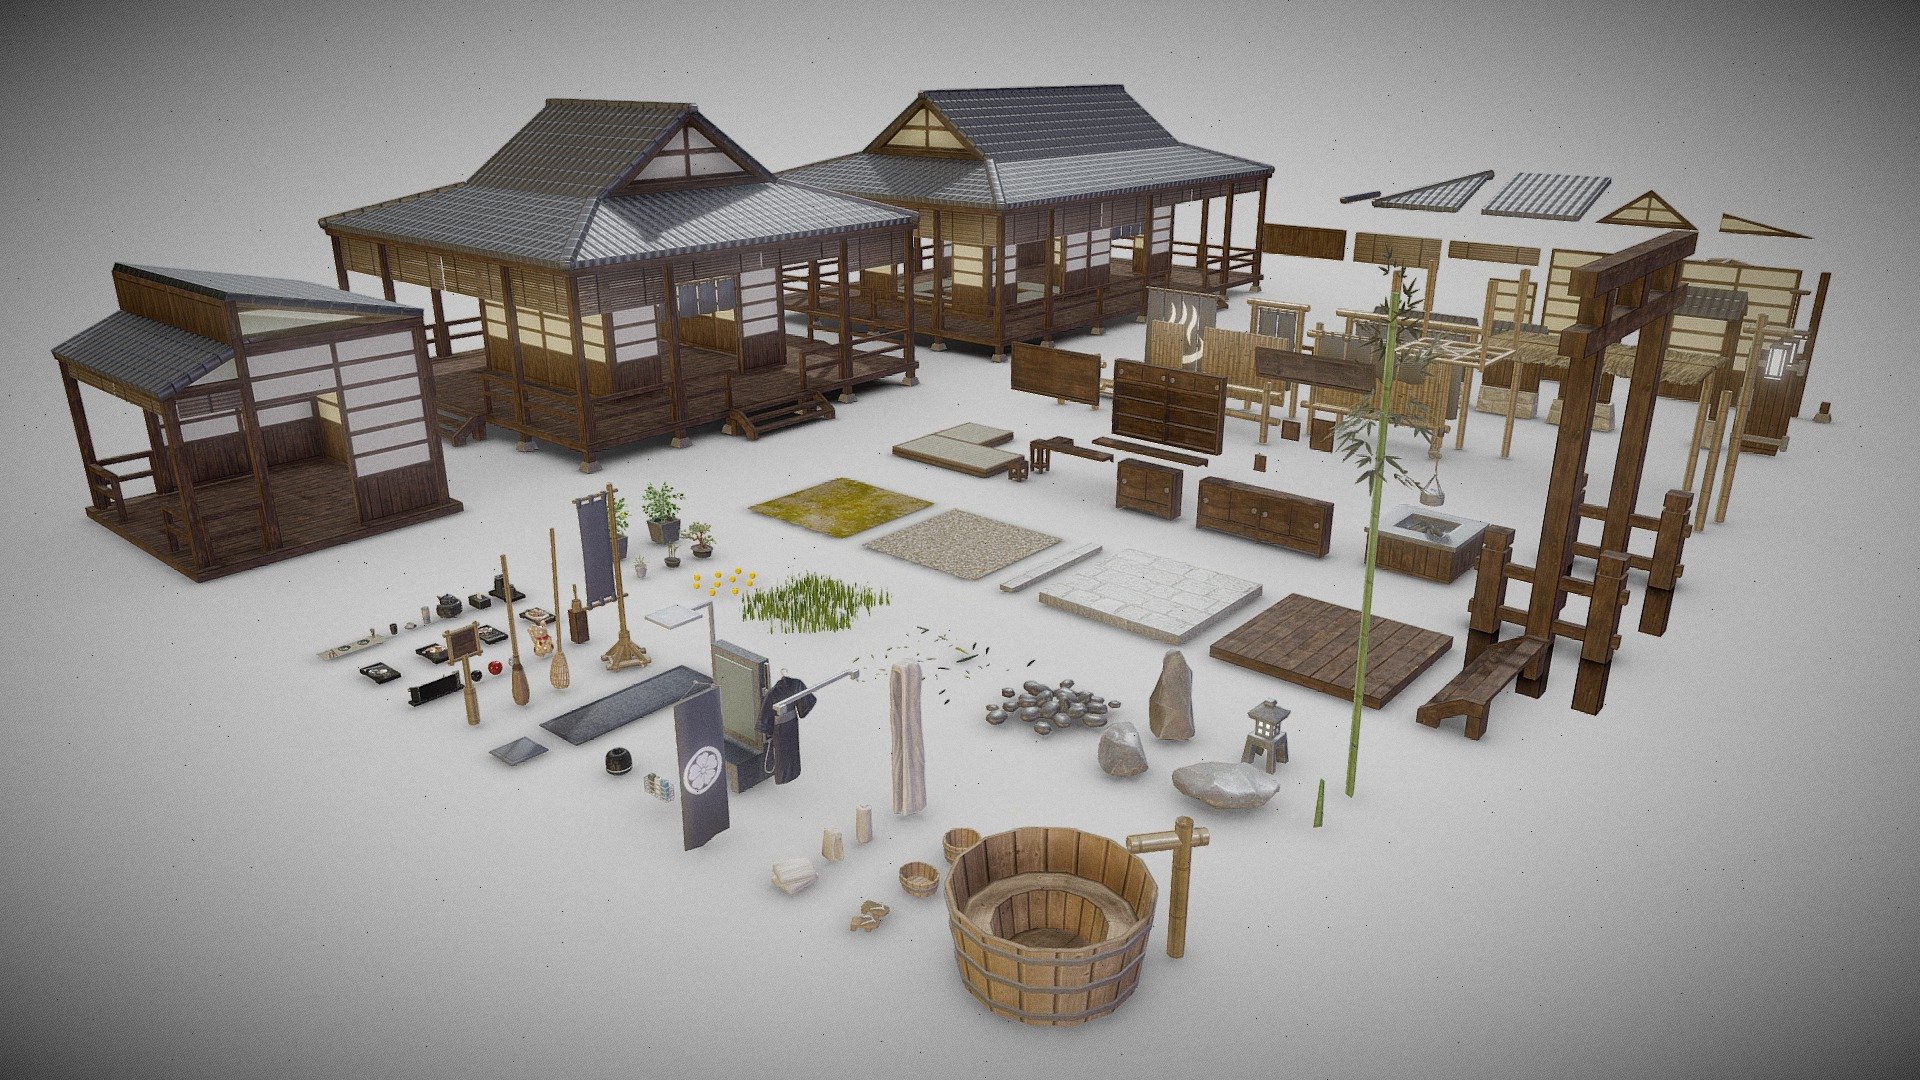 The Japanese Onsen 3D Models for Games pack includes all the models you need to create a Japanese Onsen in your game, such as:




Onsen building

Hot spring tub

Bath house

Tae house

Furniture

Decorations

All models are created in high resolution for stunning and realistic details, perfect for use in any type of game.
Most of the models use the technique of creating  modular &amp; seamless textures. The models have very low polygon counts. 

Examples are used in the Metaverse and Game WebGL. https://www.spatial.io/@7plusdesign

Onsen Environment (full-scene) GLB flie included. https://skfb.ly/oPMGK



 - Japanese Low Polygon Pack - Buy Royalty Free 3D model by 7PLUS 3d model